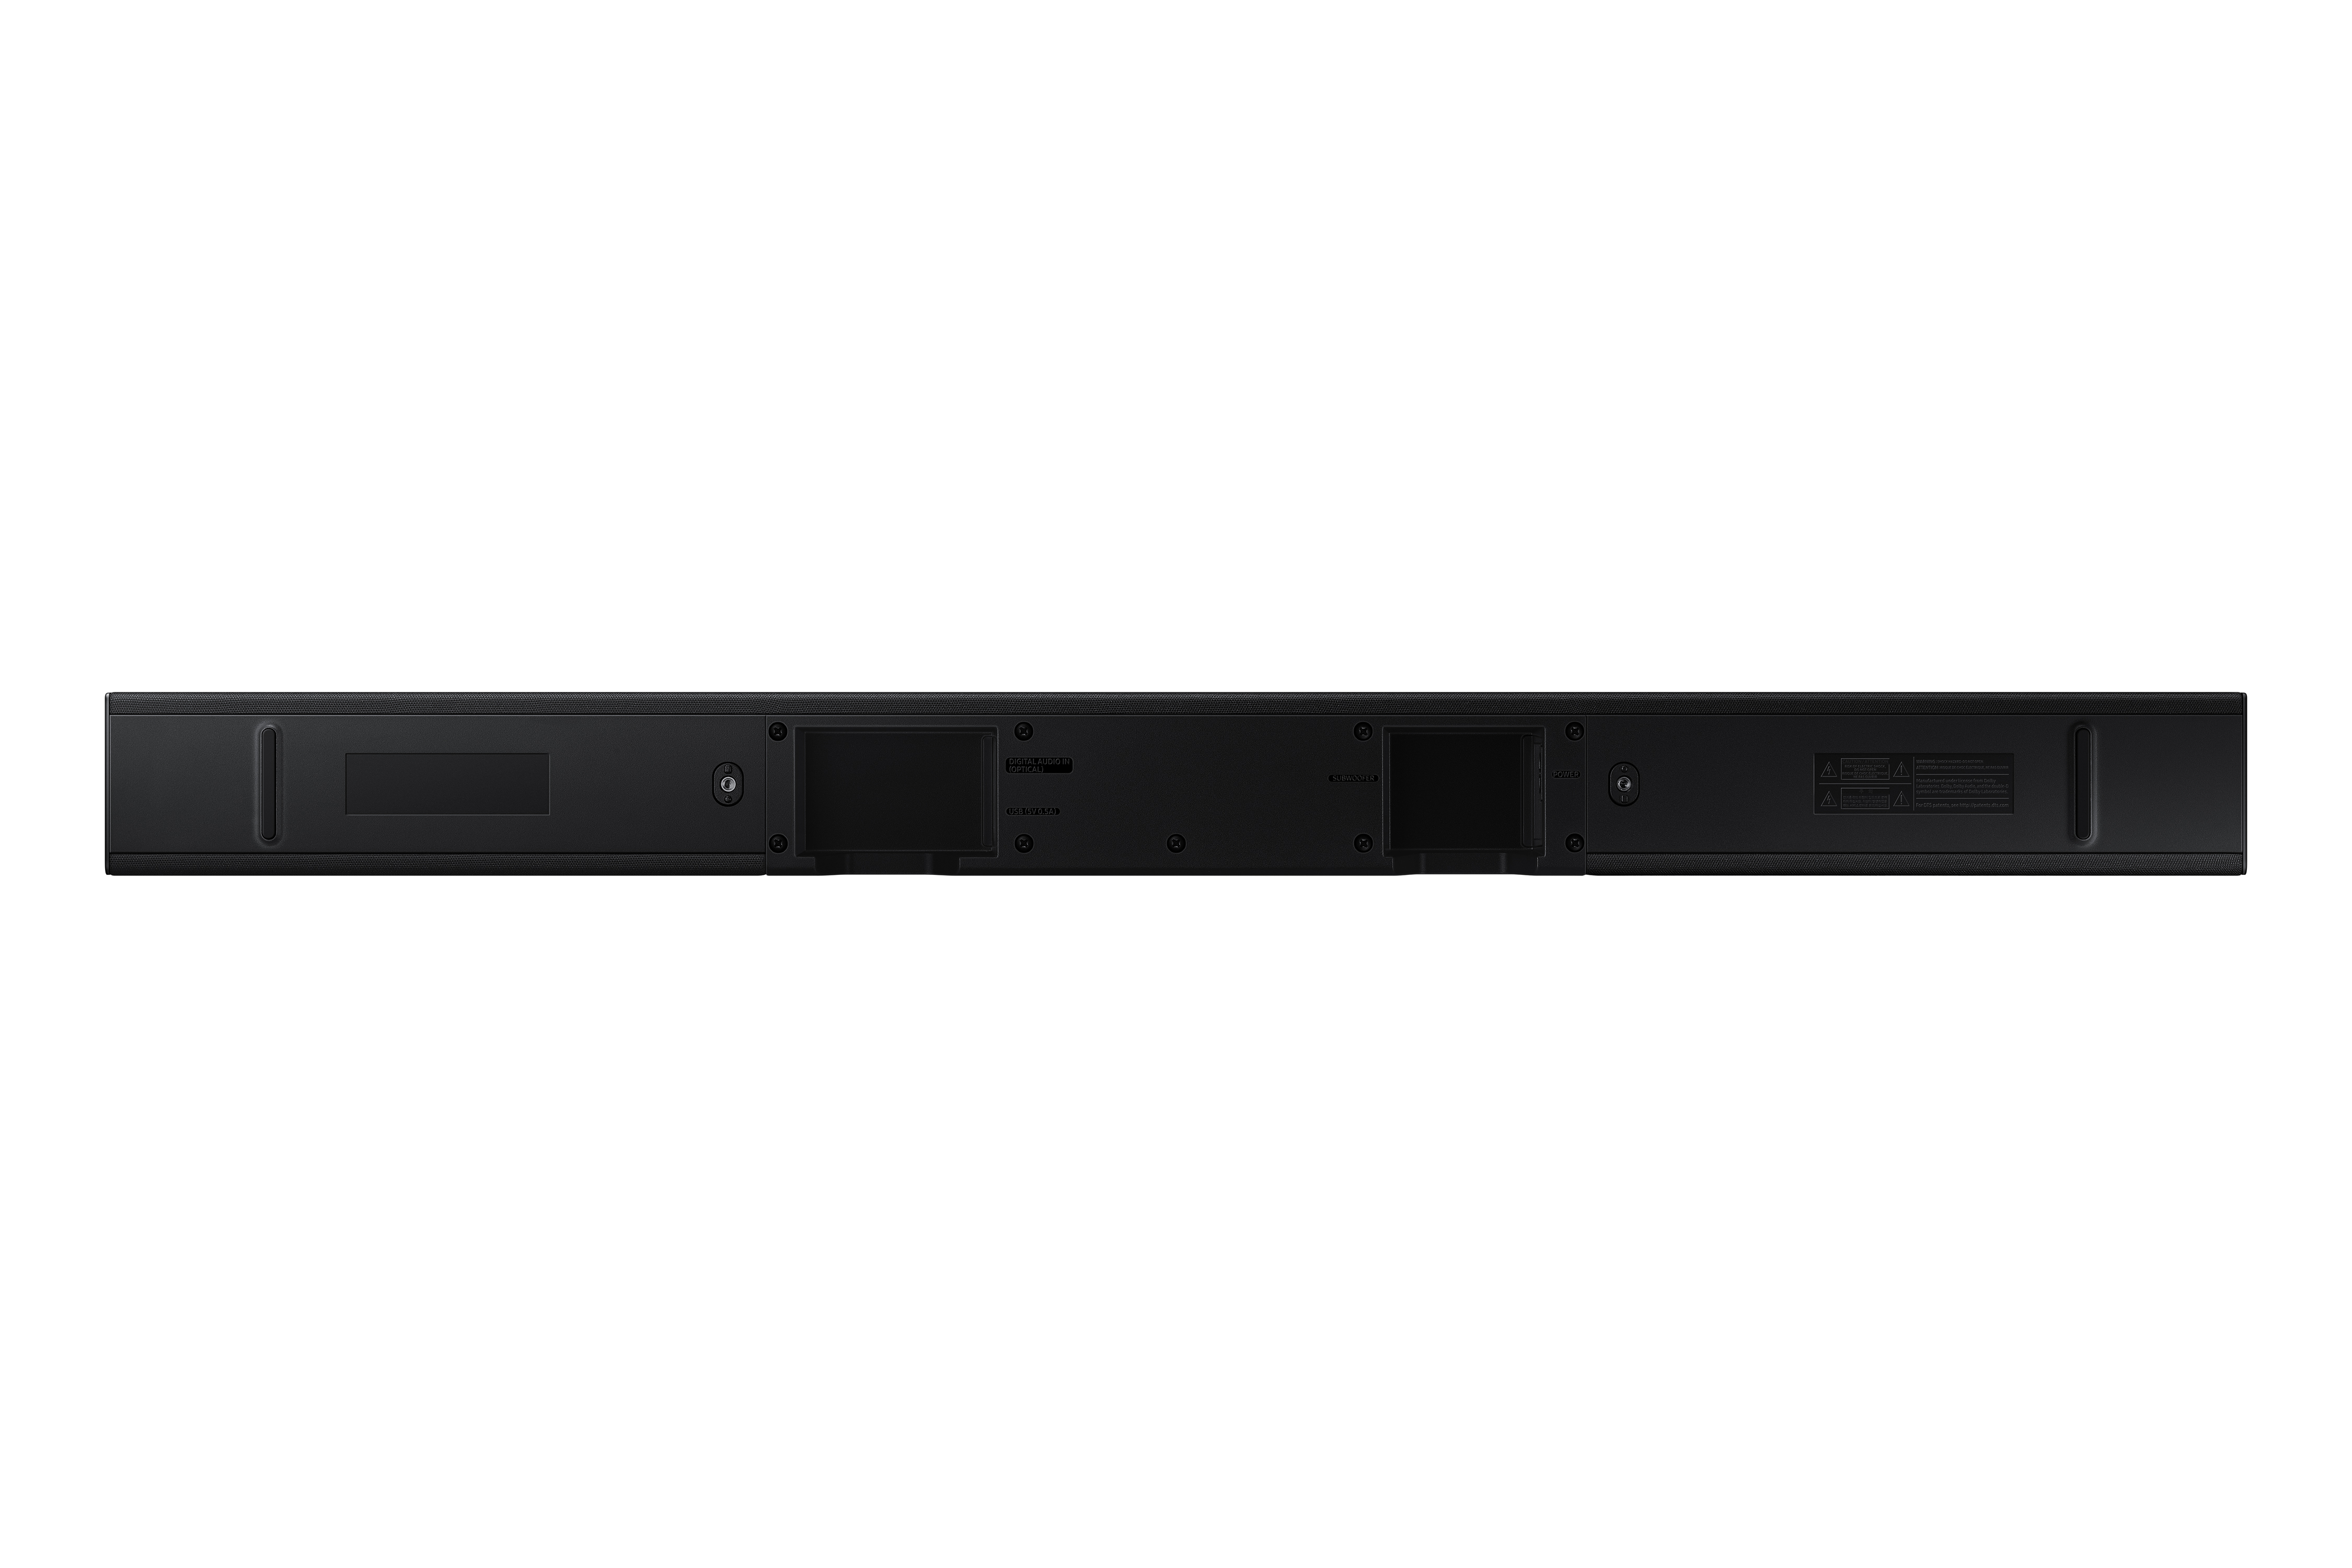 SAMSUNG HW-A60M 3.1 Channel Soundbar with Wireless Subwoofer and Dolby 5.1 / DTS Virtual:X - image 2 of 5